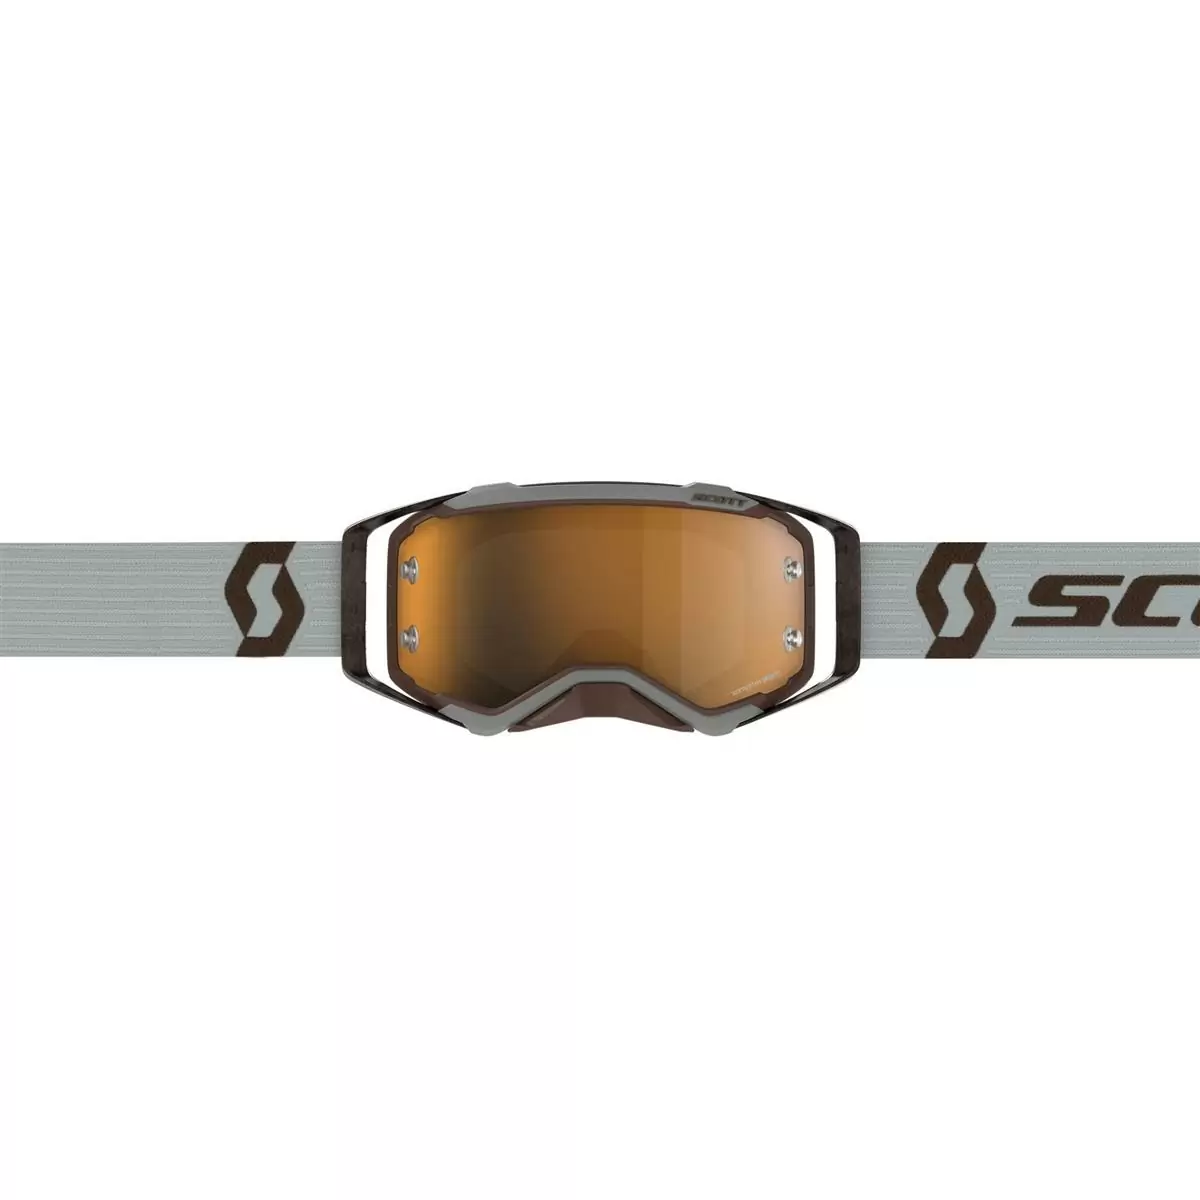 Prospect Goggle Grey/Brown Gold Chrome Works Lens #1